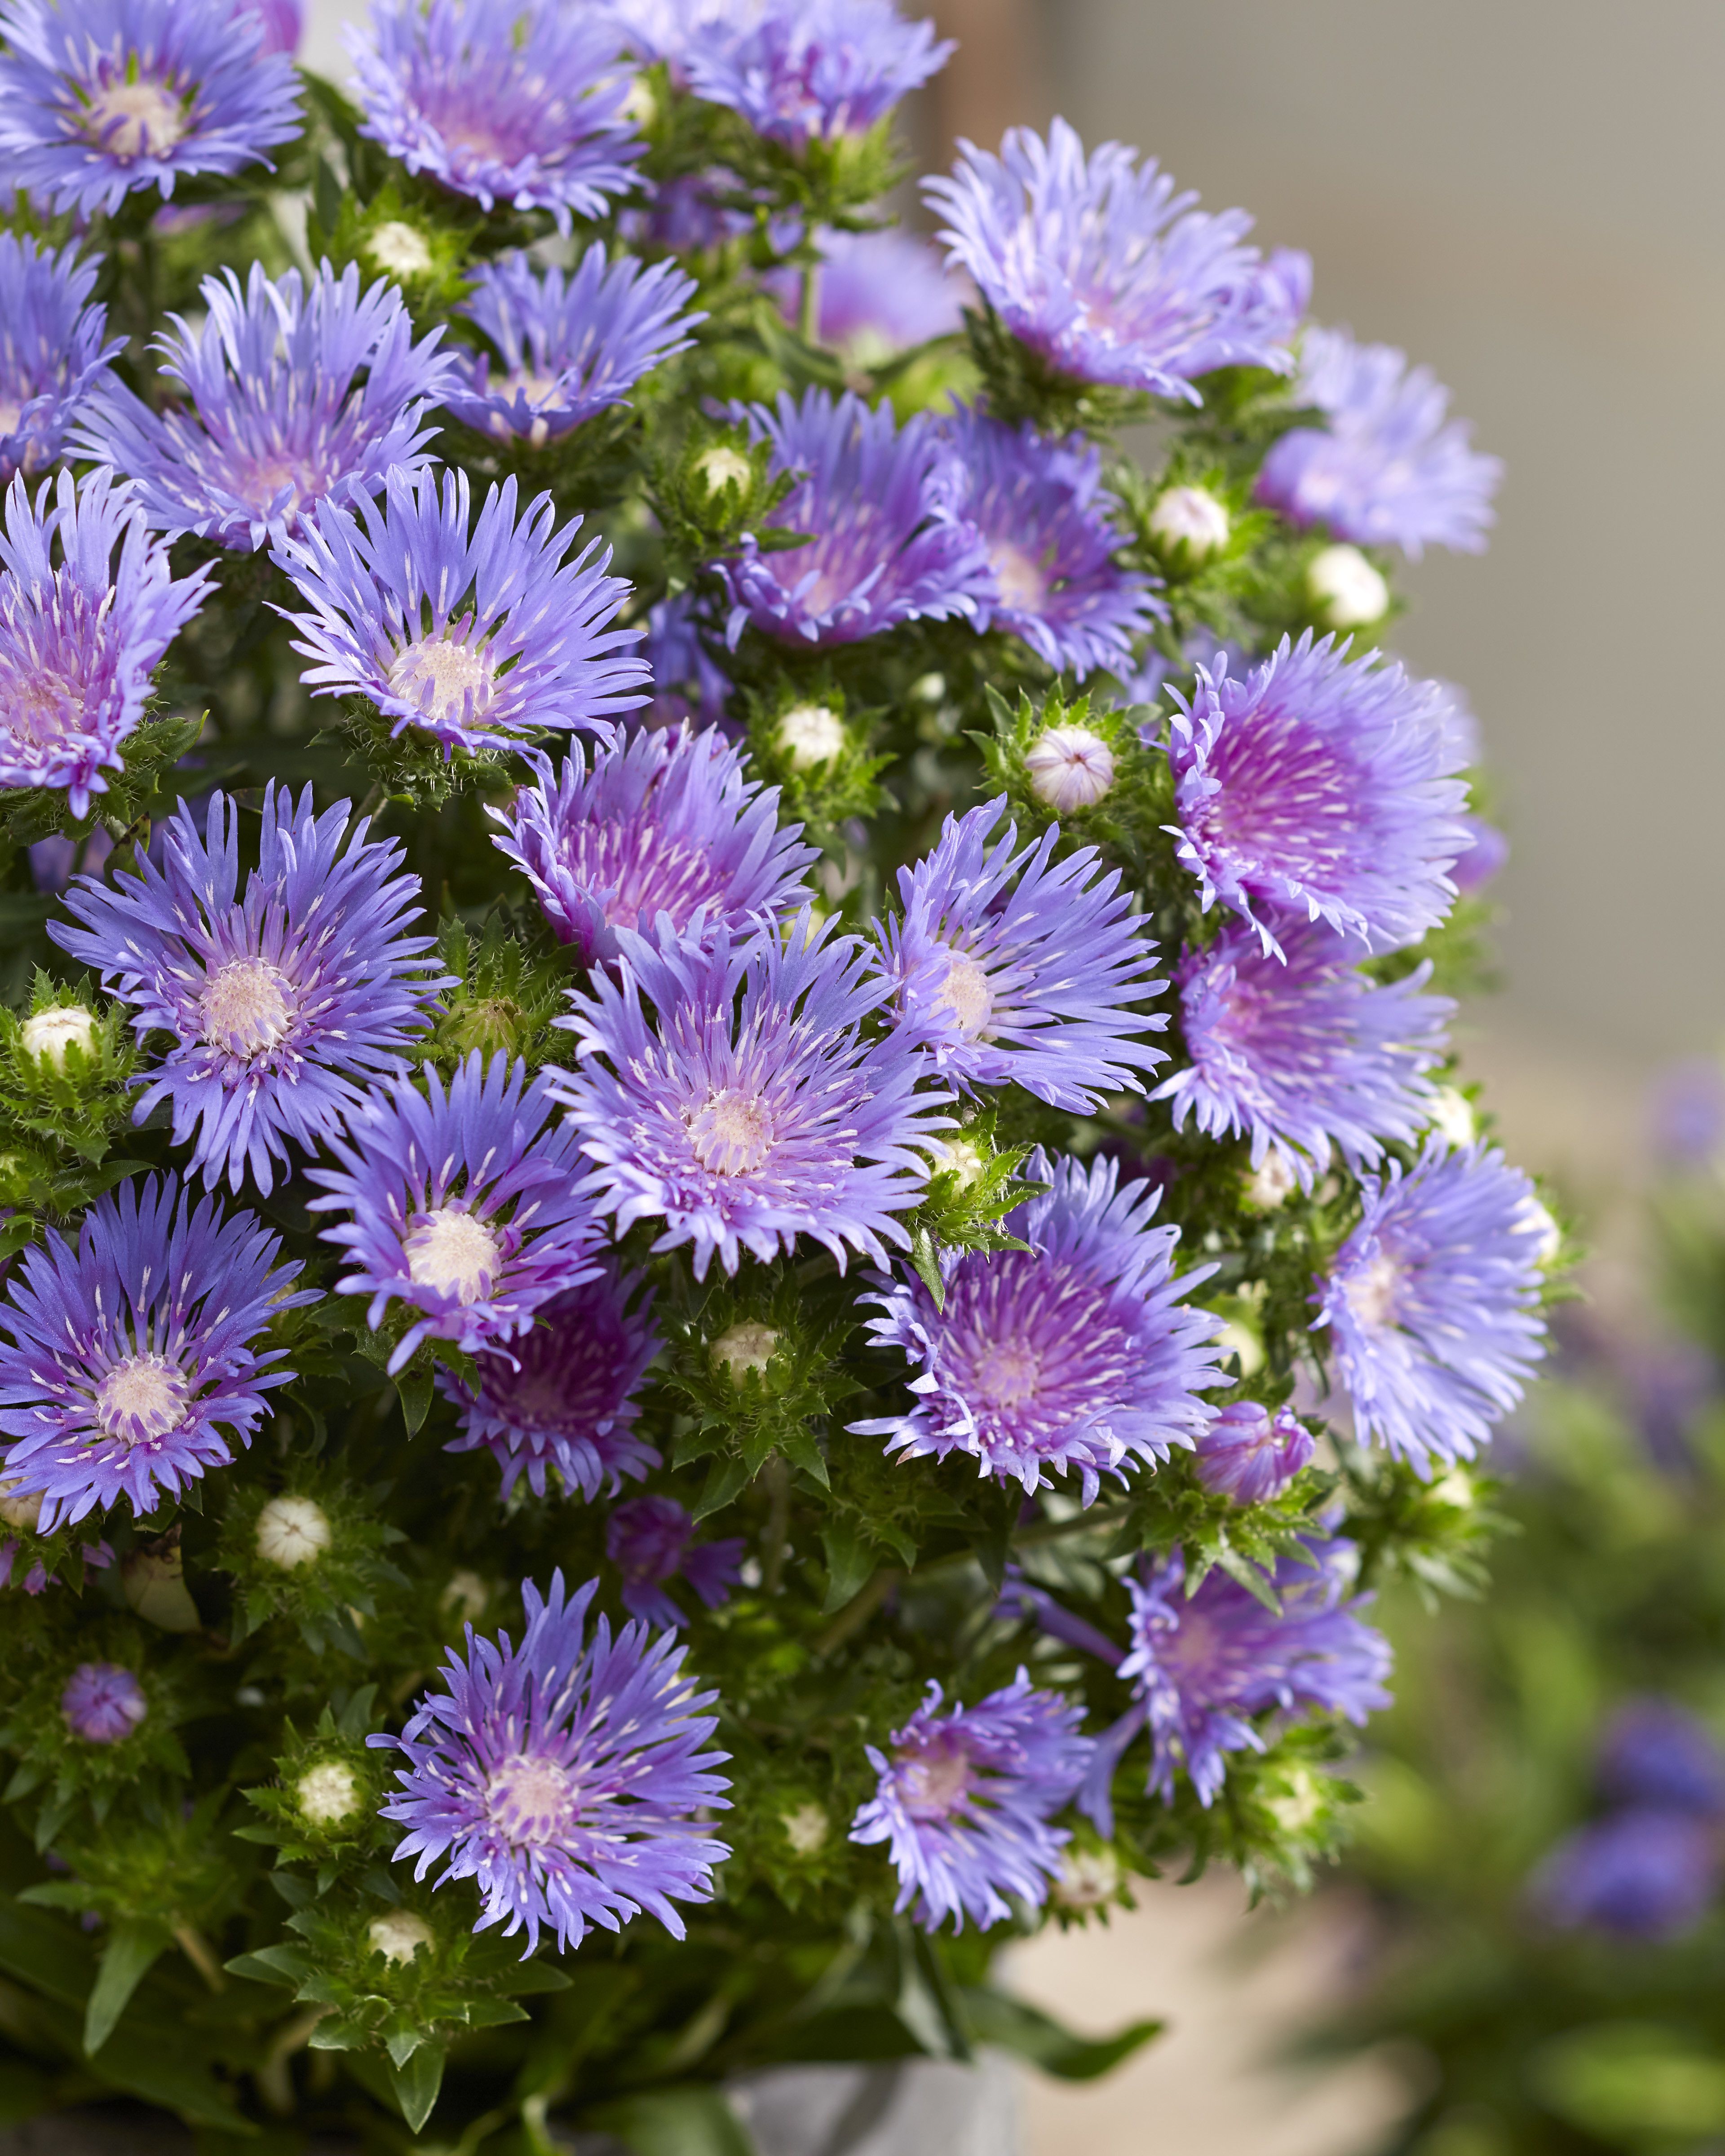 images/plants/stokesia/sto-mels-blue/sto-mels-blue-0010.jpg